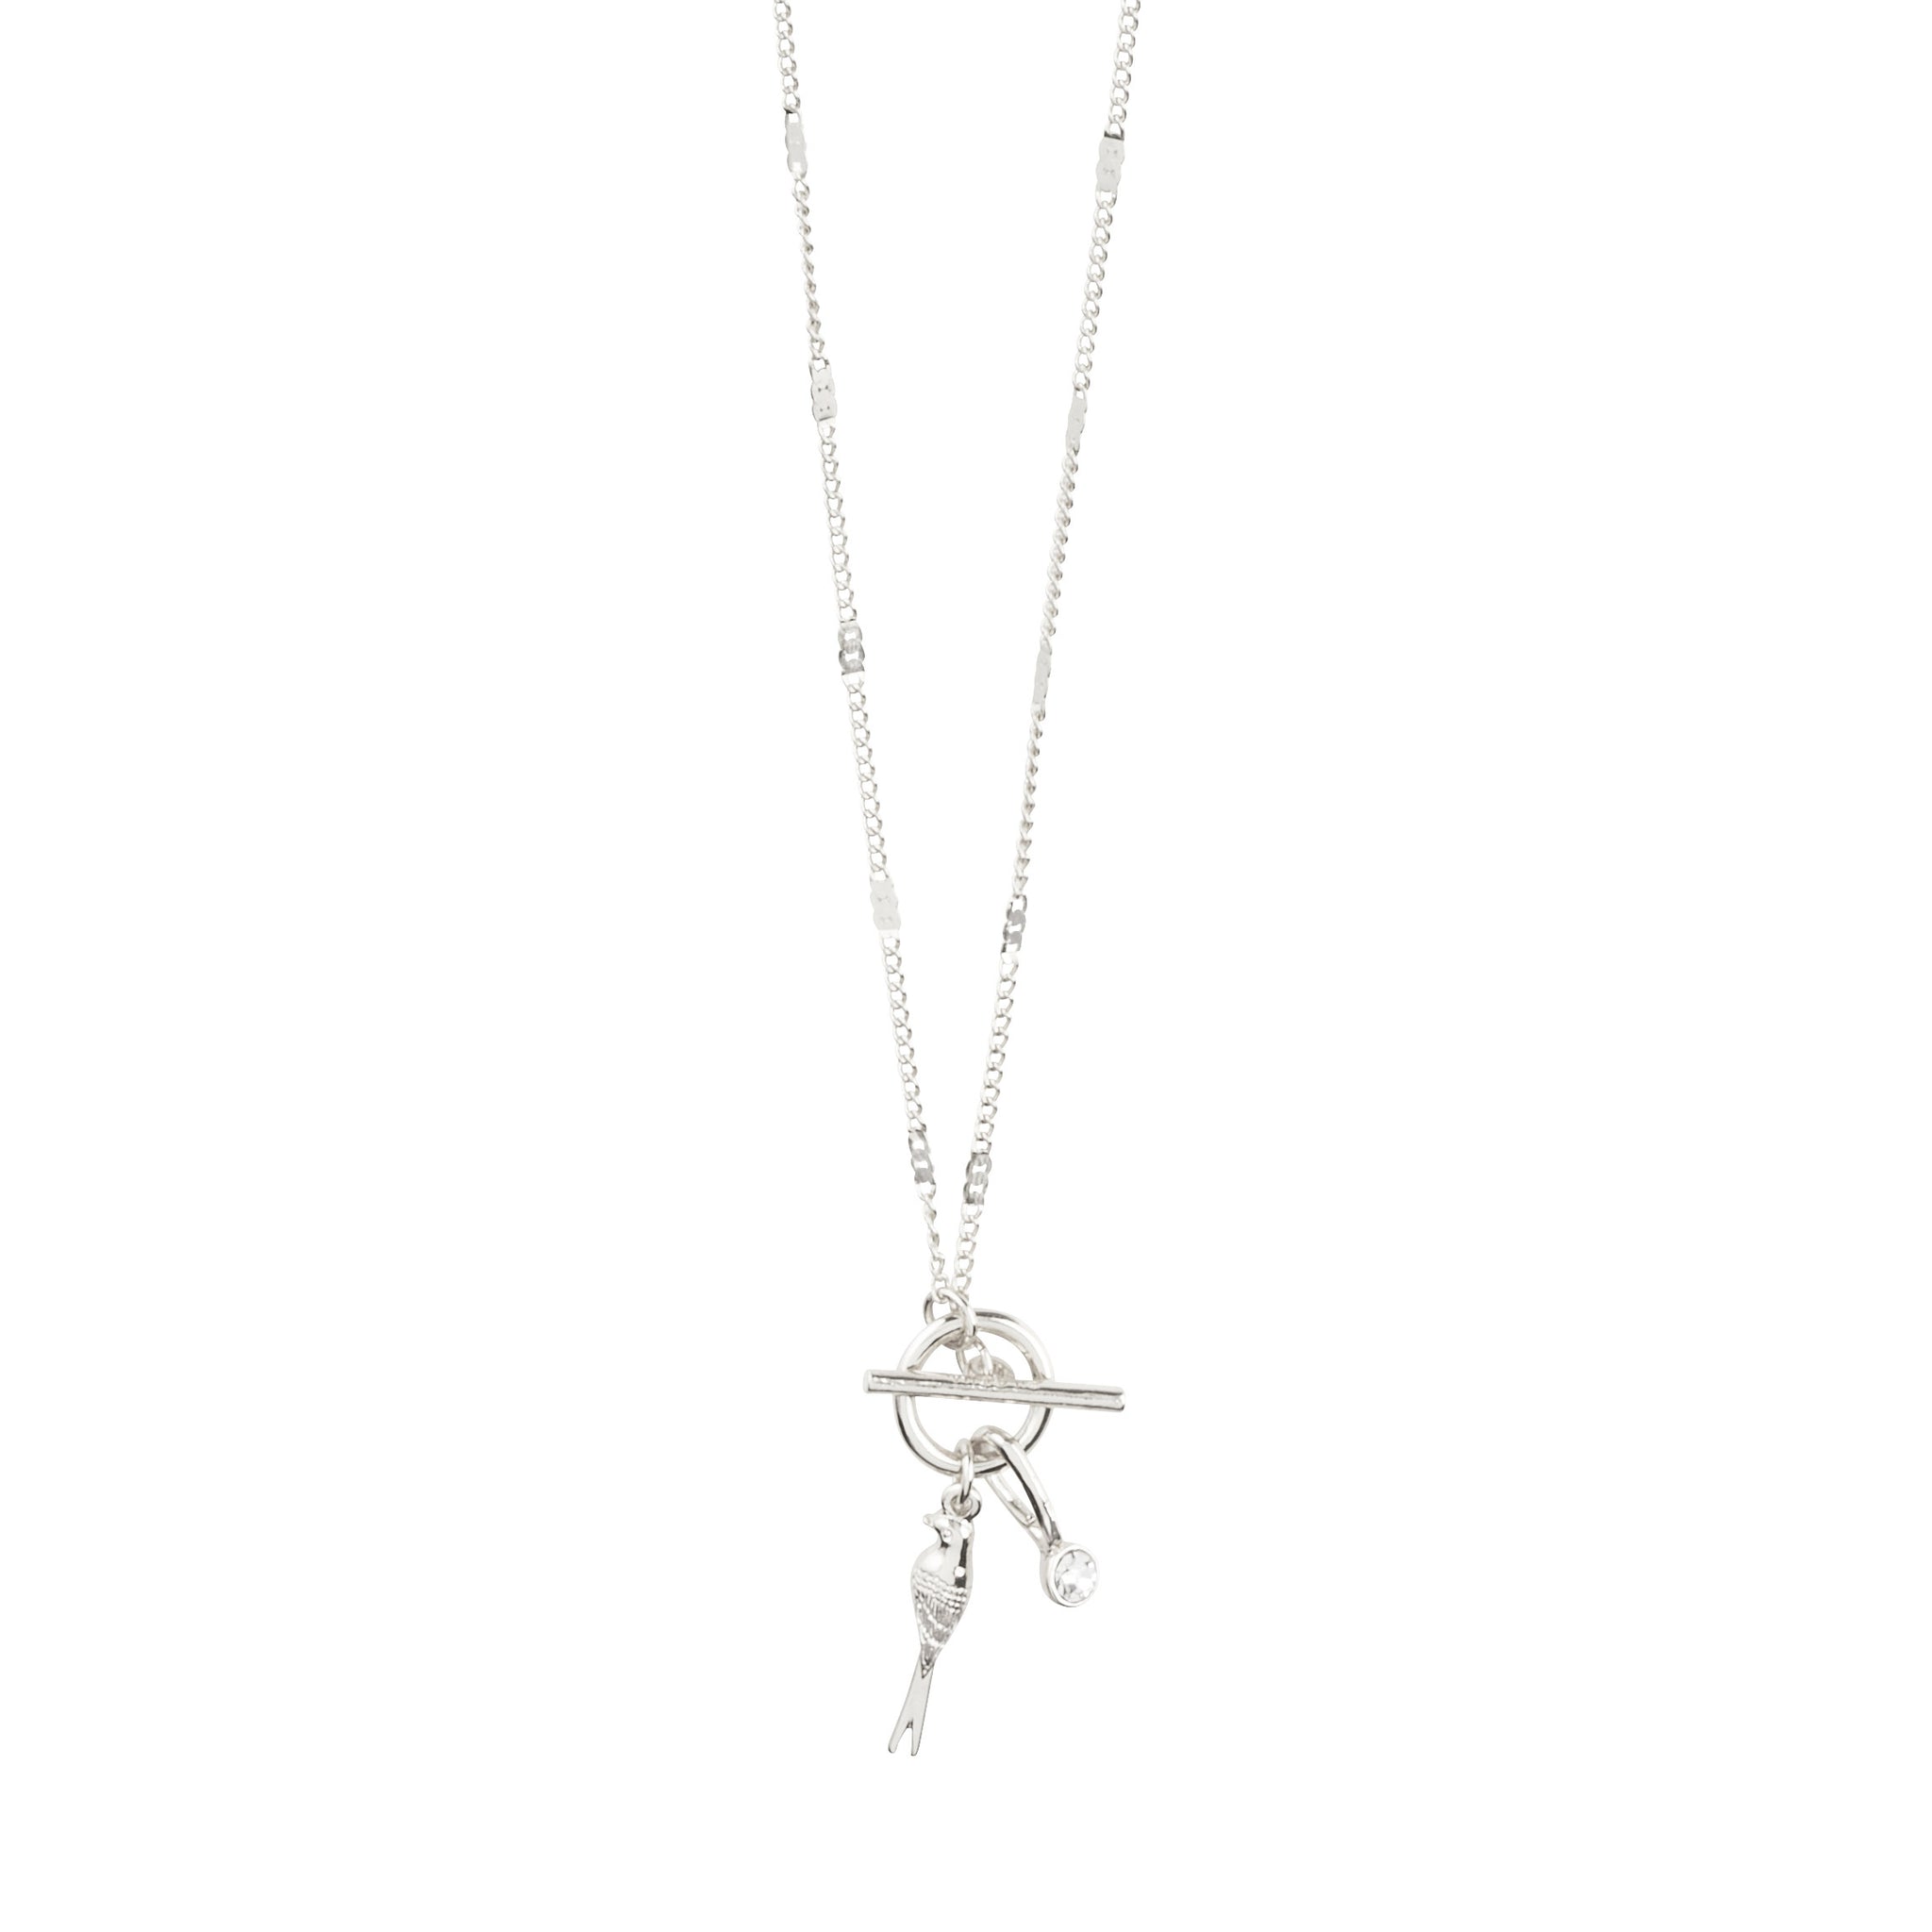 Freedom Necklace 2-in-1 - Silver Plated